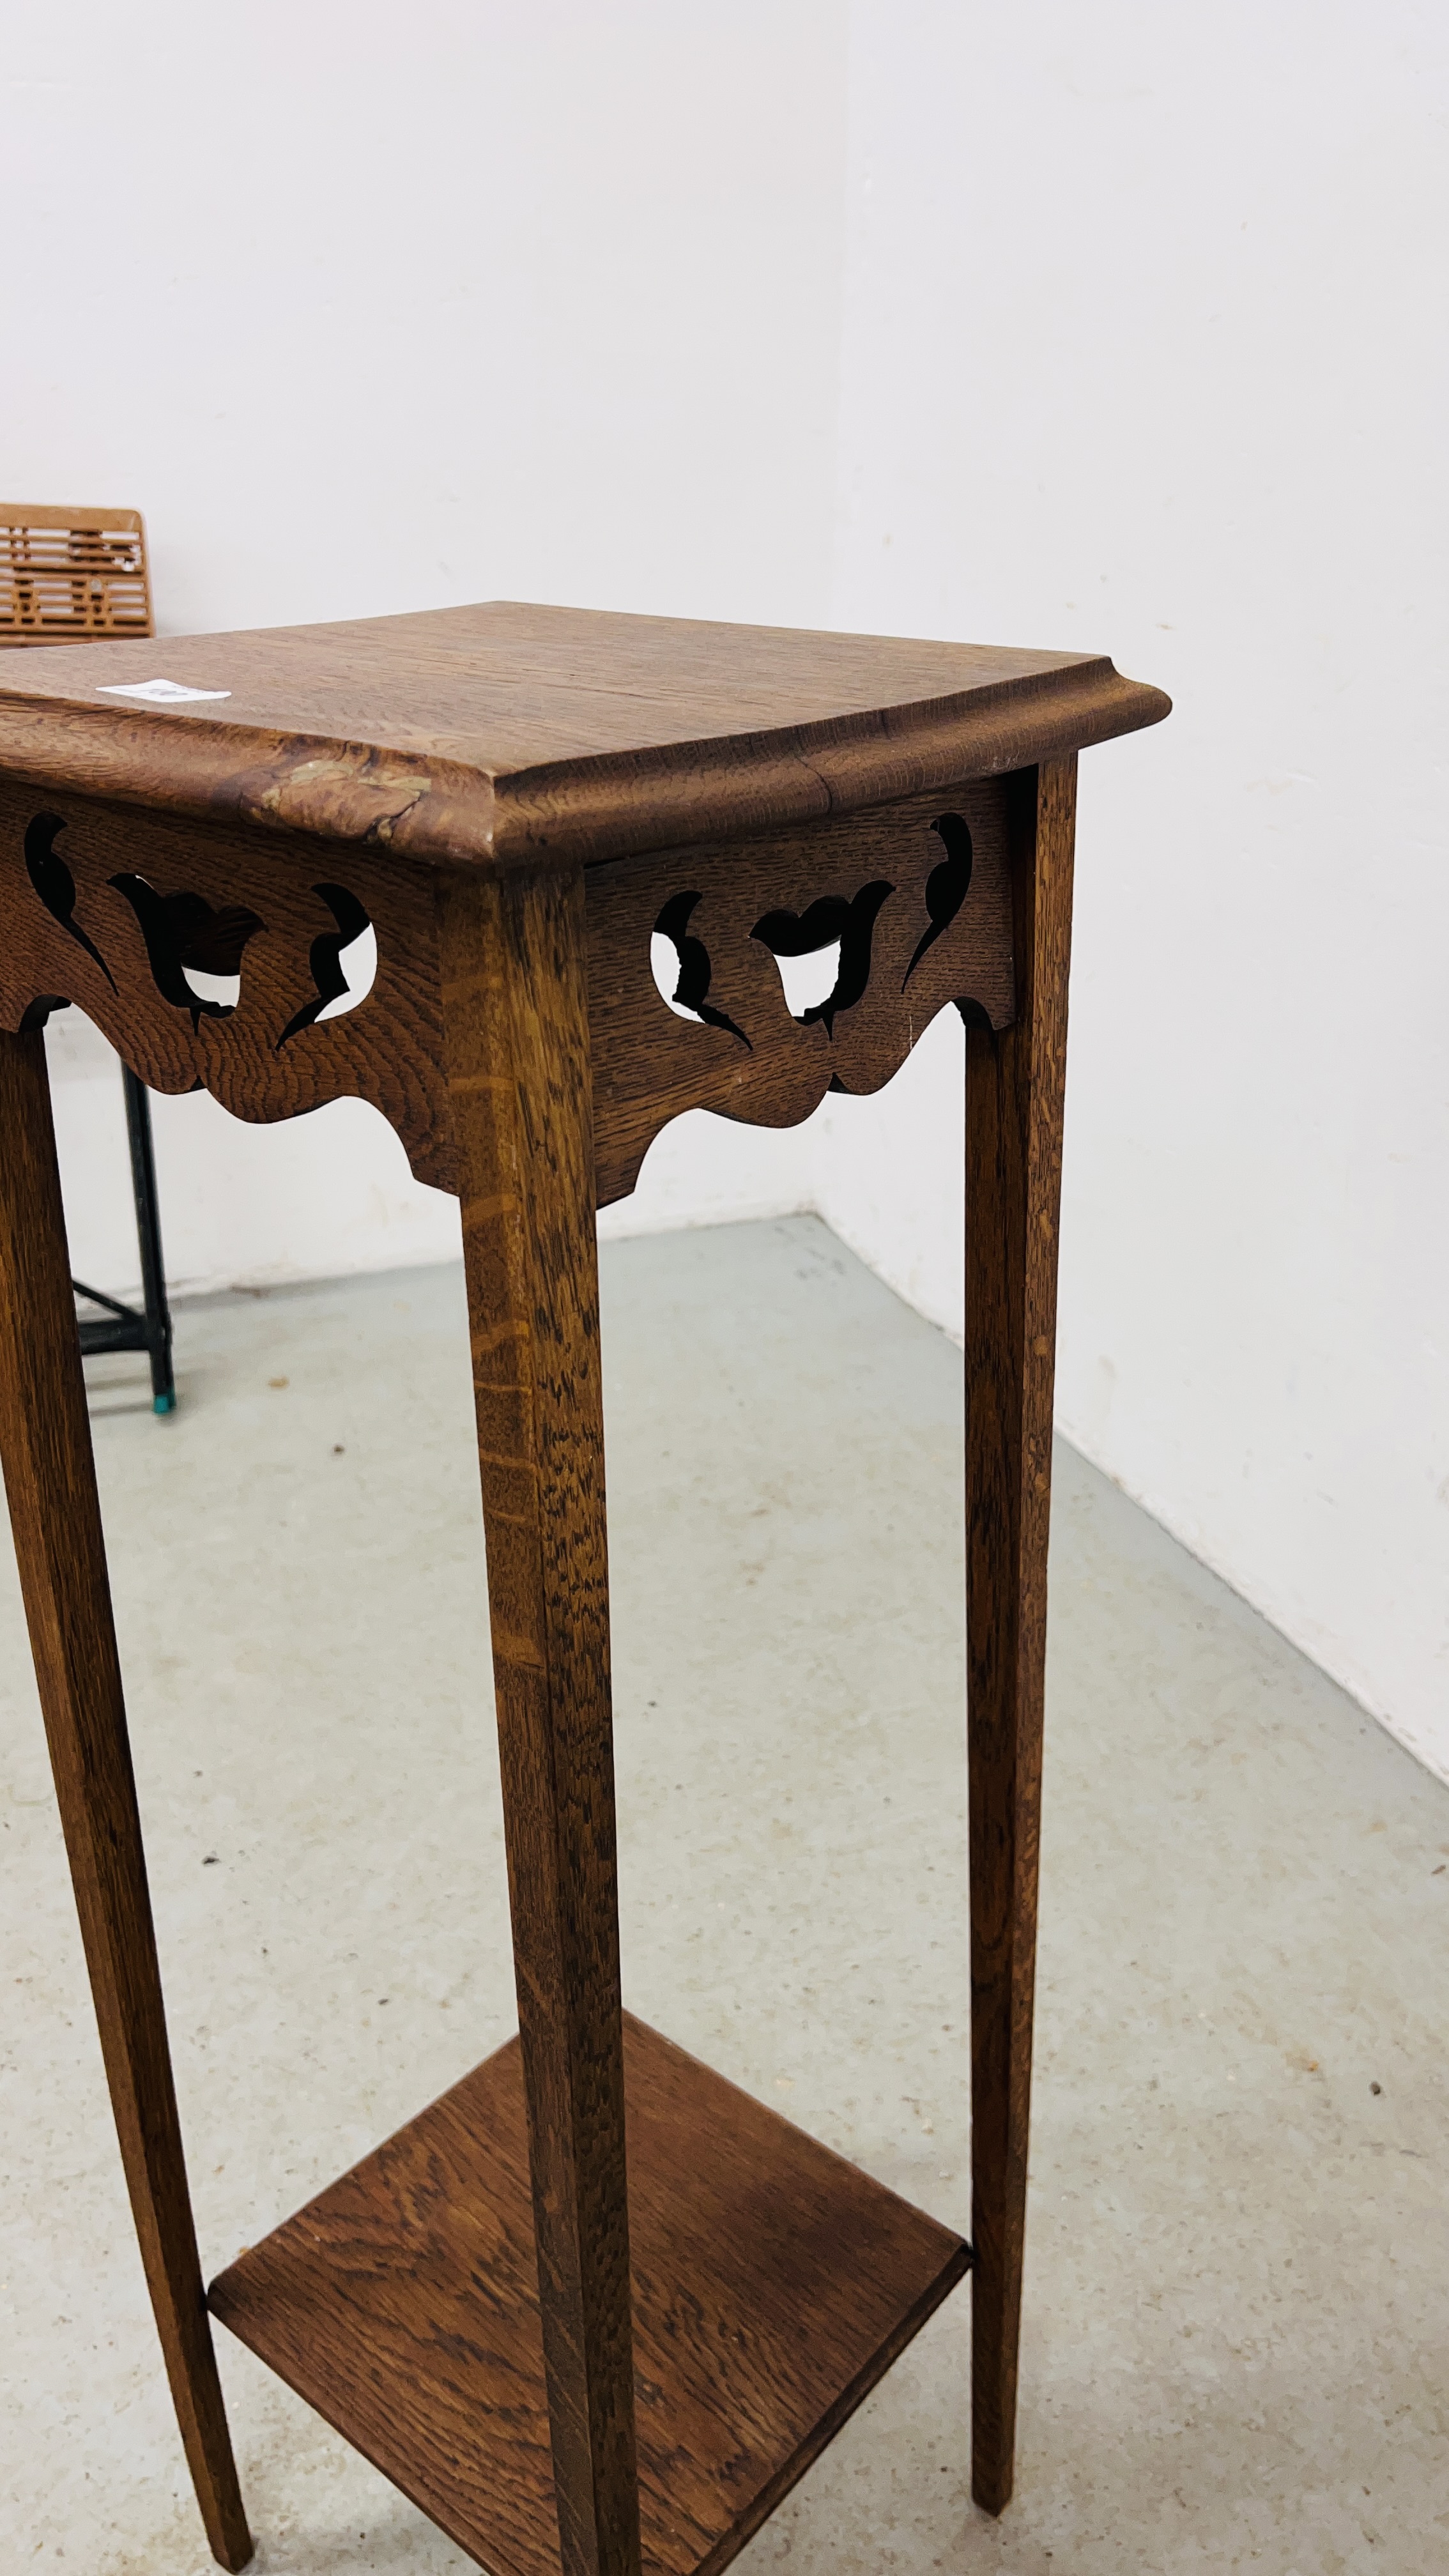 A VINTAGE OAK PLANT STAND WITH FRETT WORK DETAIL. - Image 6 of 6